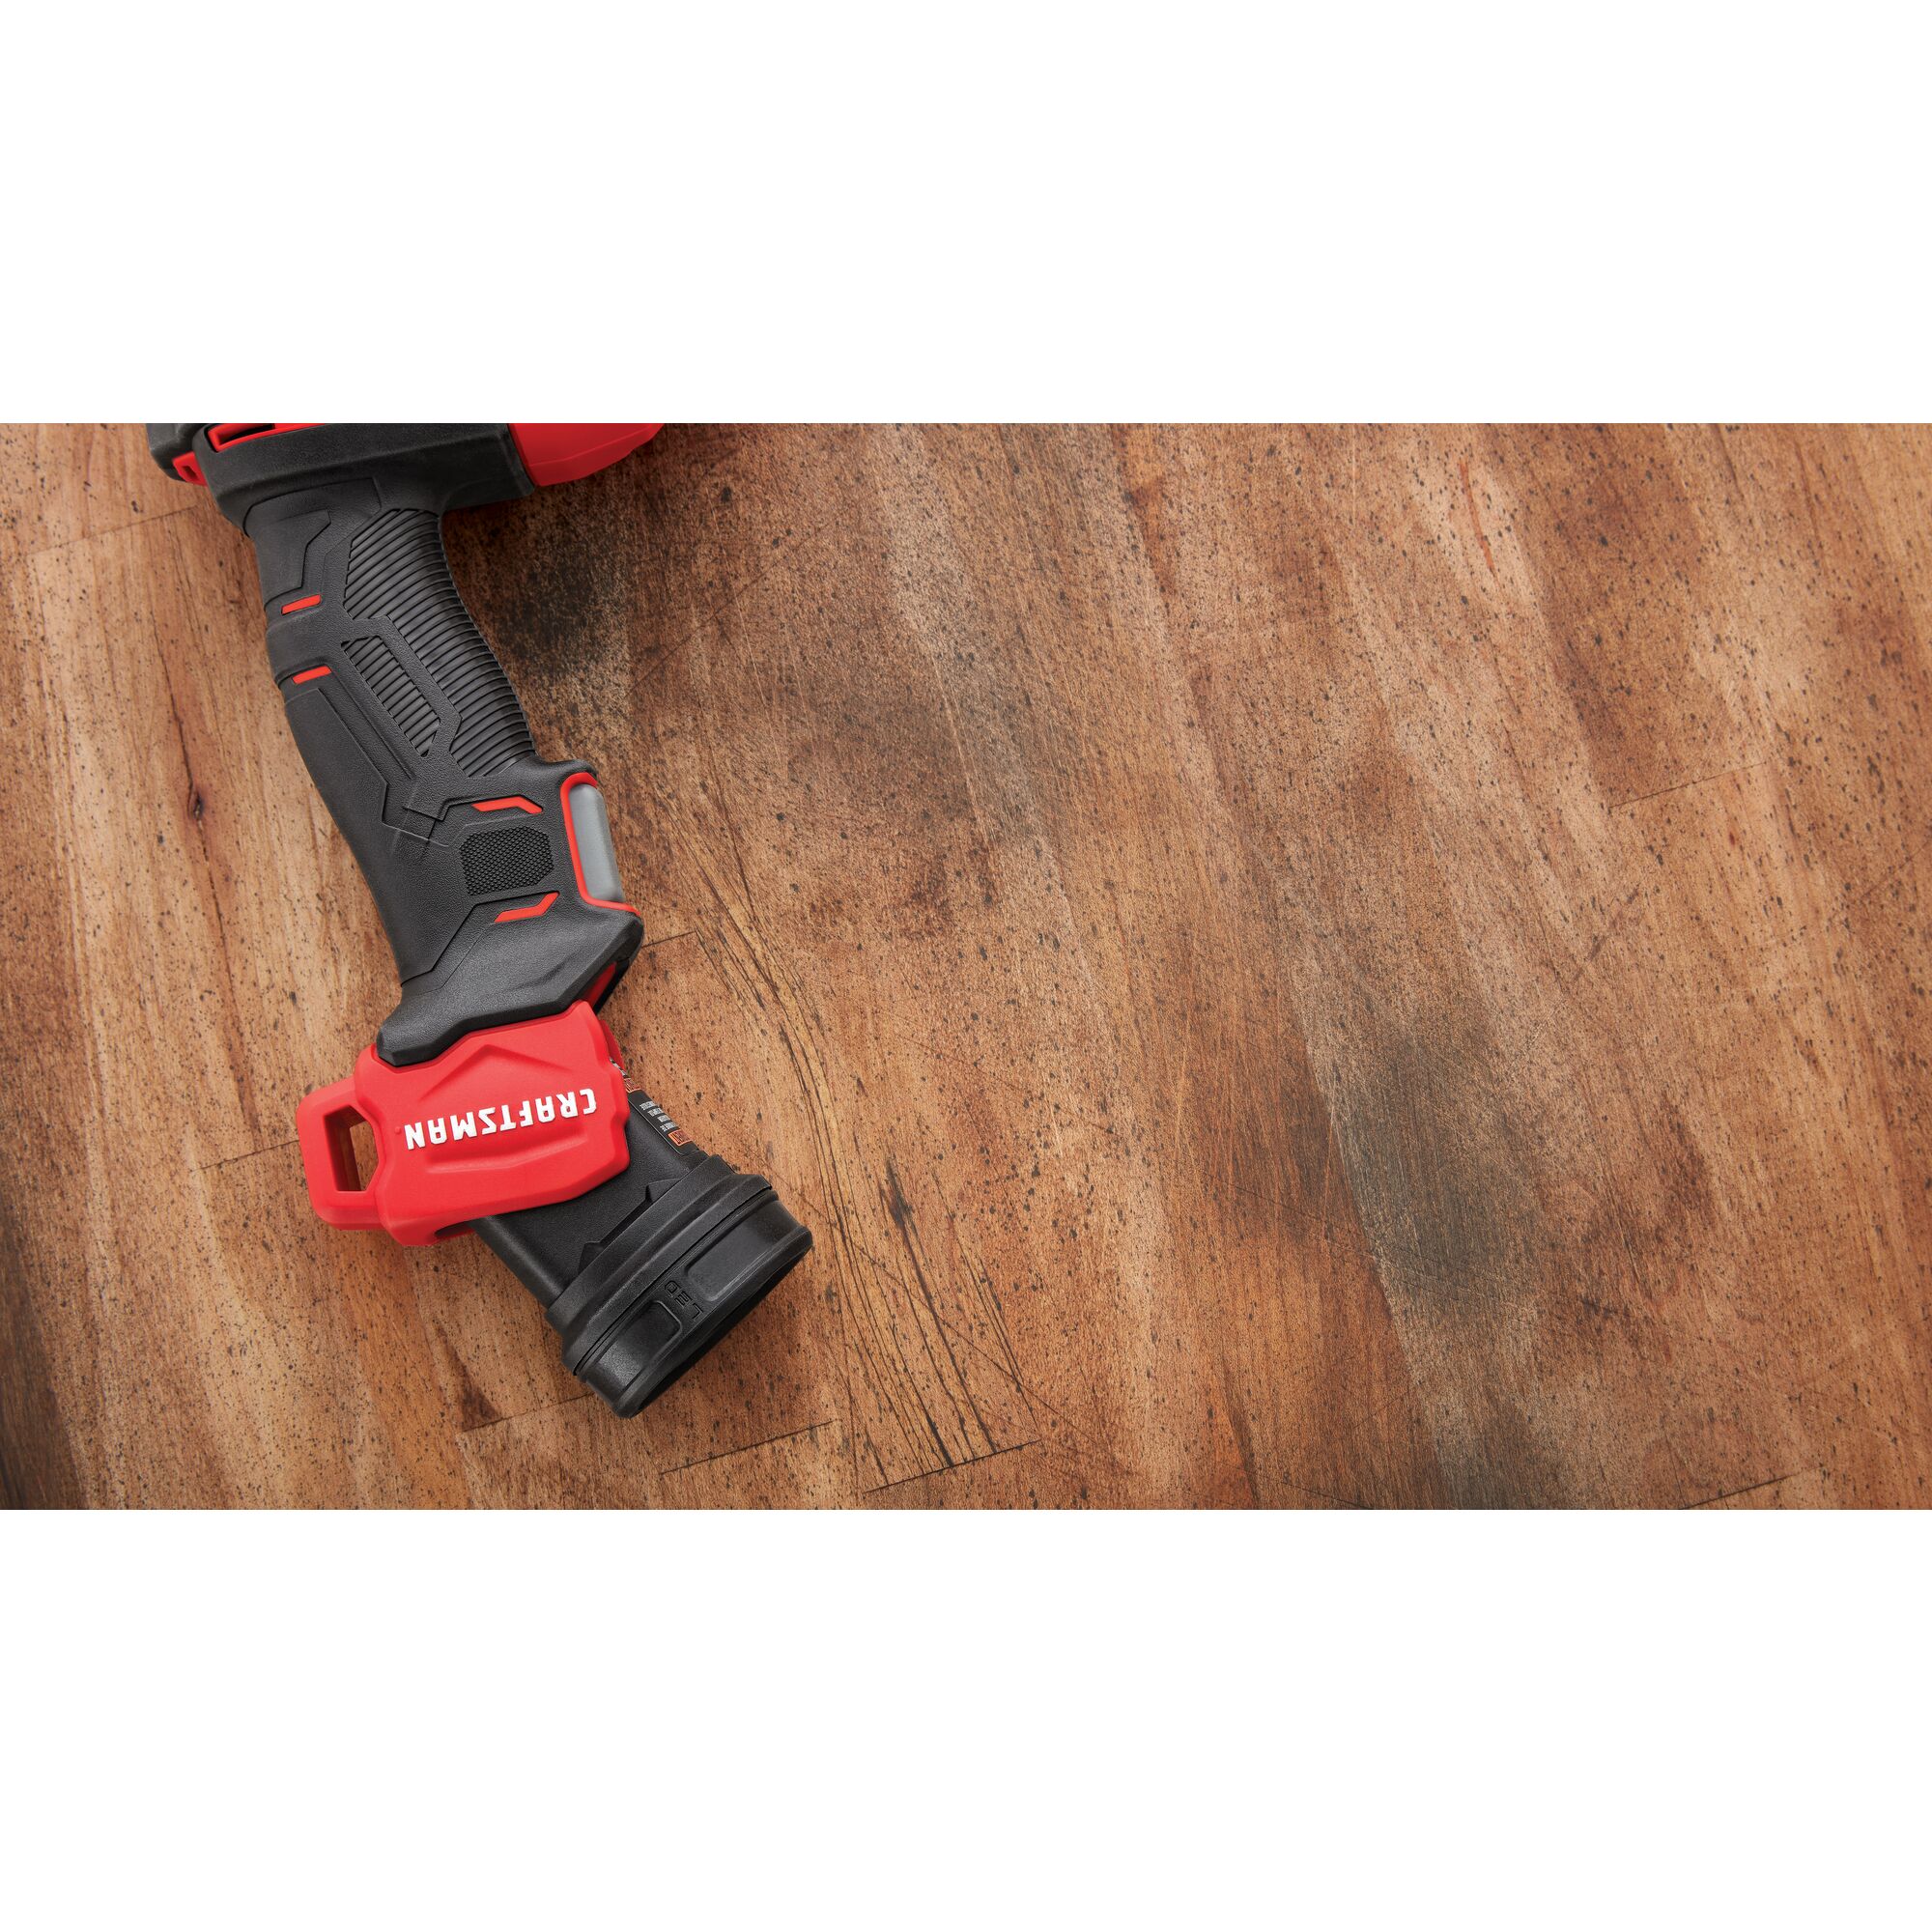 Variable speed feature of cordless half inch drill and driver kit 1 battery.